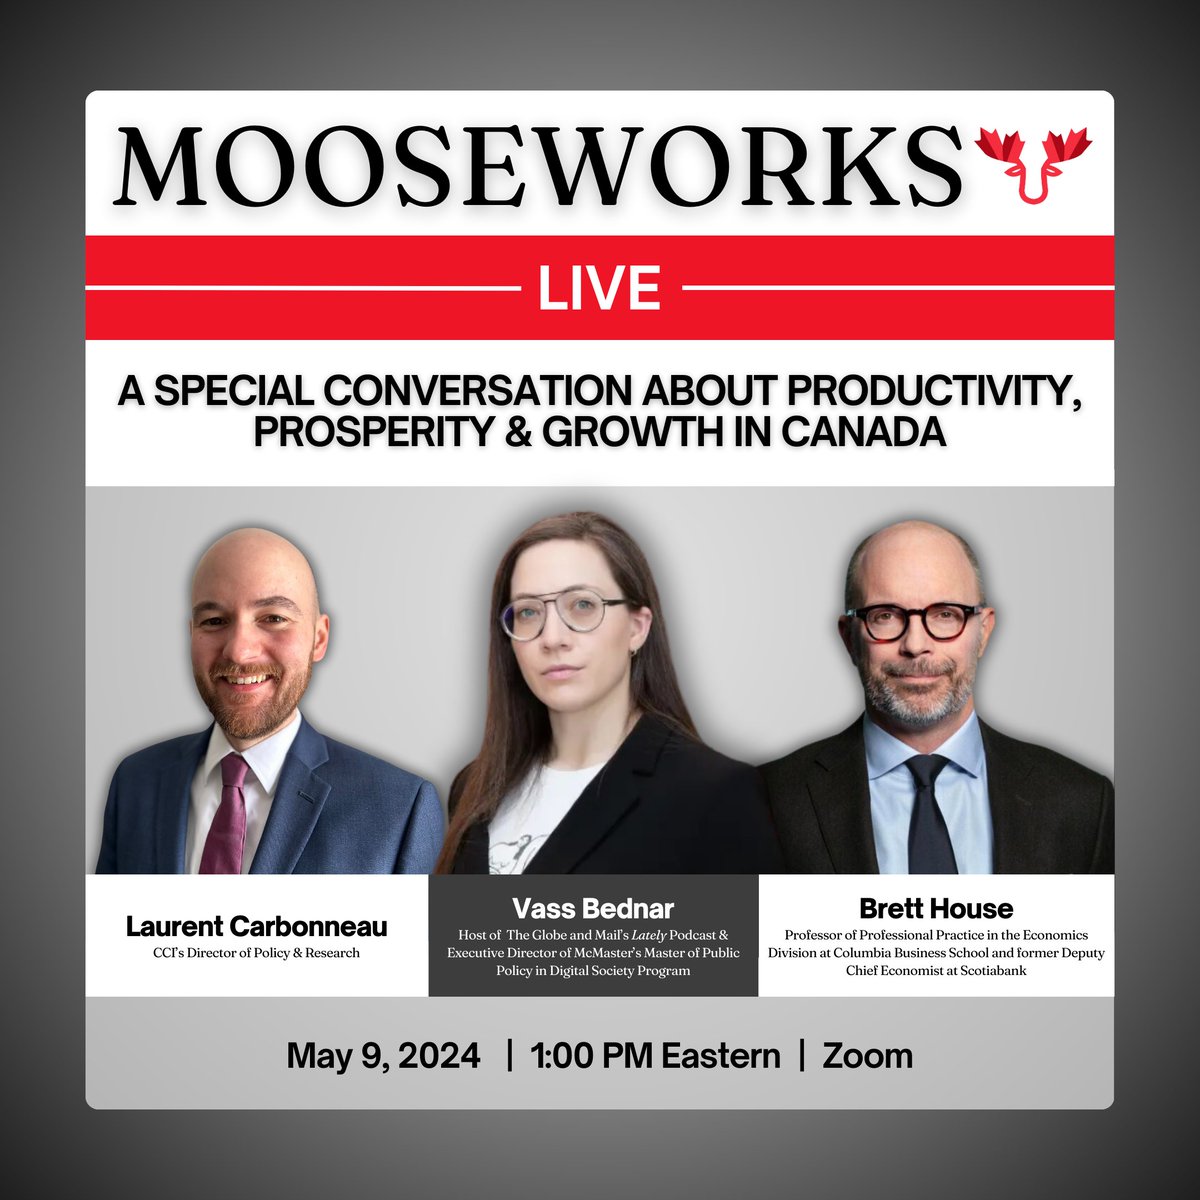 Join @VassB, @BrettEHouse and @laurentdcar on May 9 for our first-ever Mooseworks Live event, focused on solutions to Canada's productivity, prosperity, and economic growth challenges. RSVP here: airtable.com/appm5DPG07cpRX…